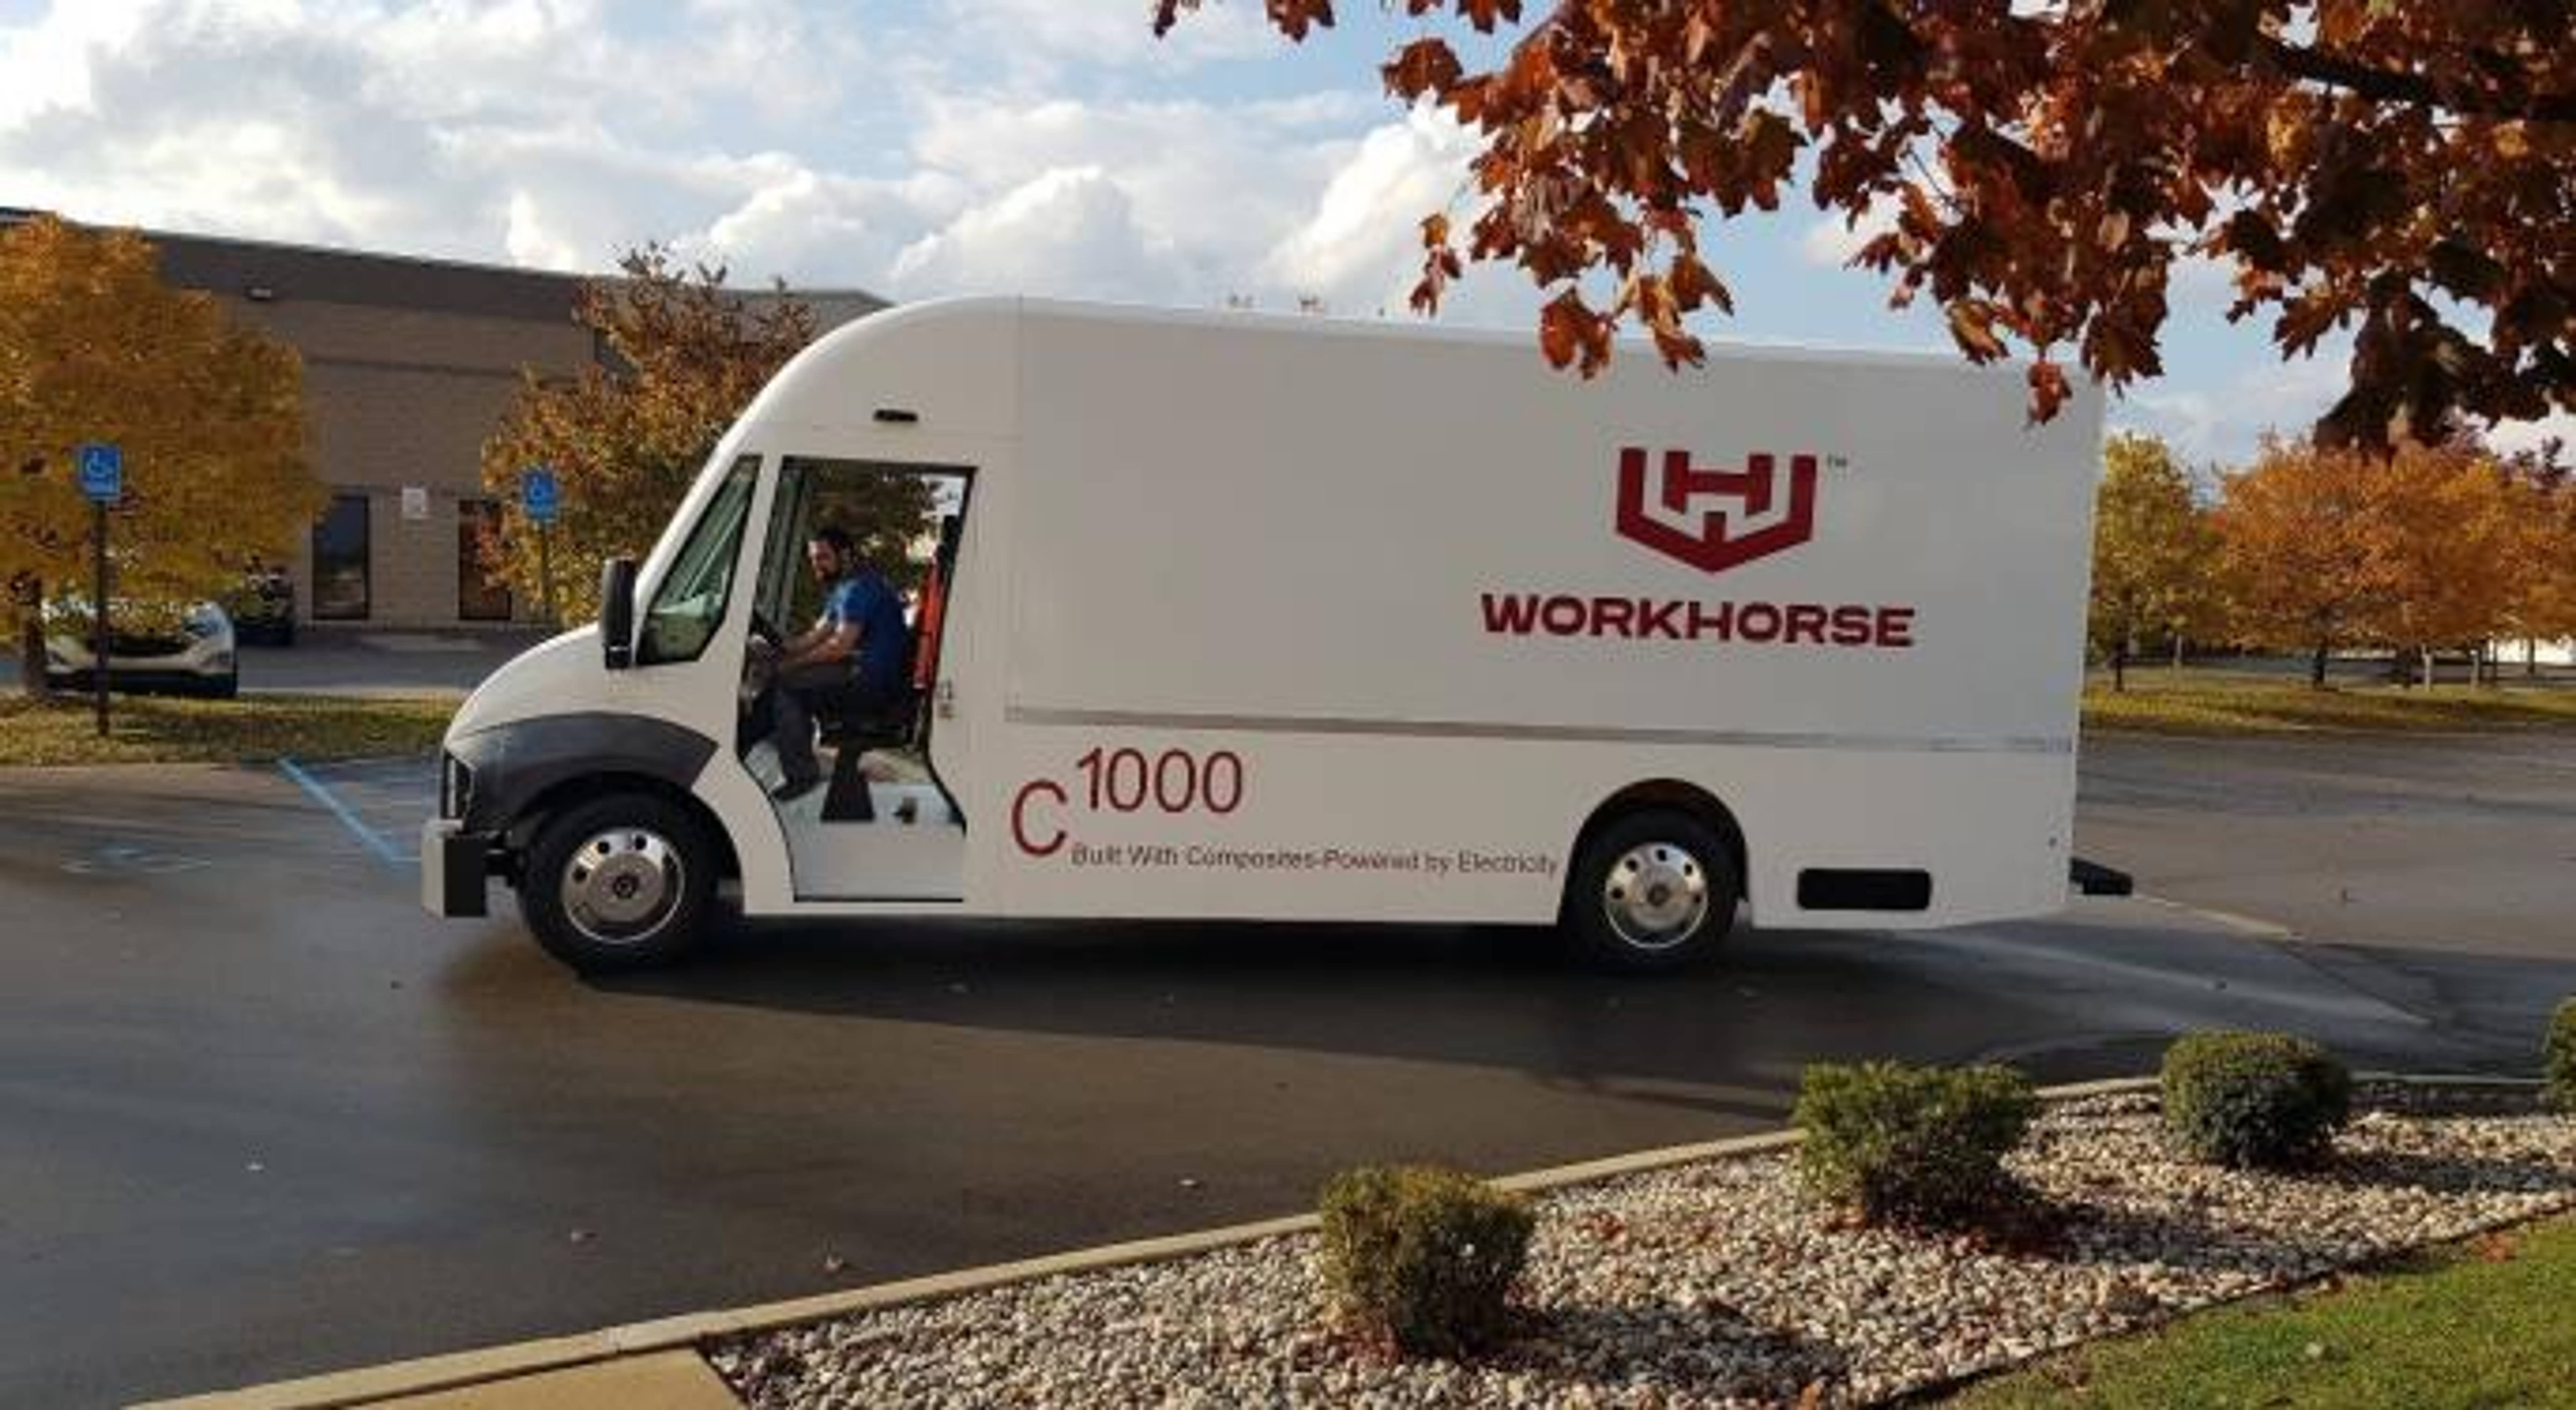 A Look At Workhorse Options Activity Amid USPS Delay, Roth Downgrade